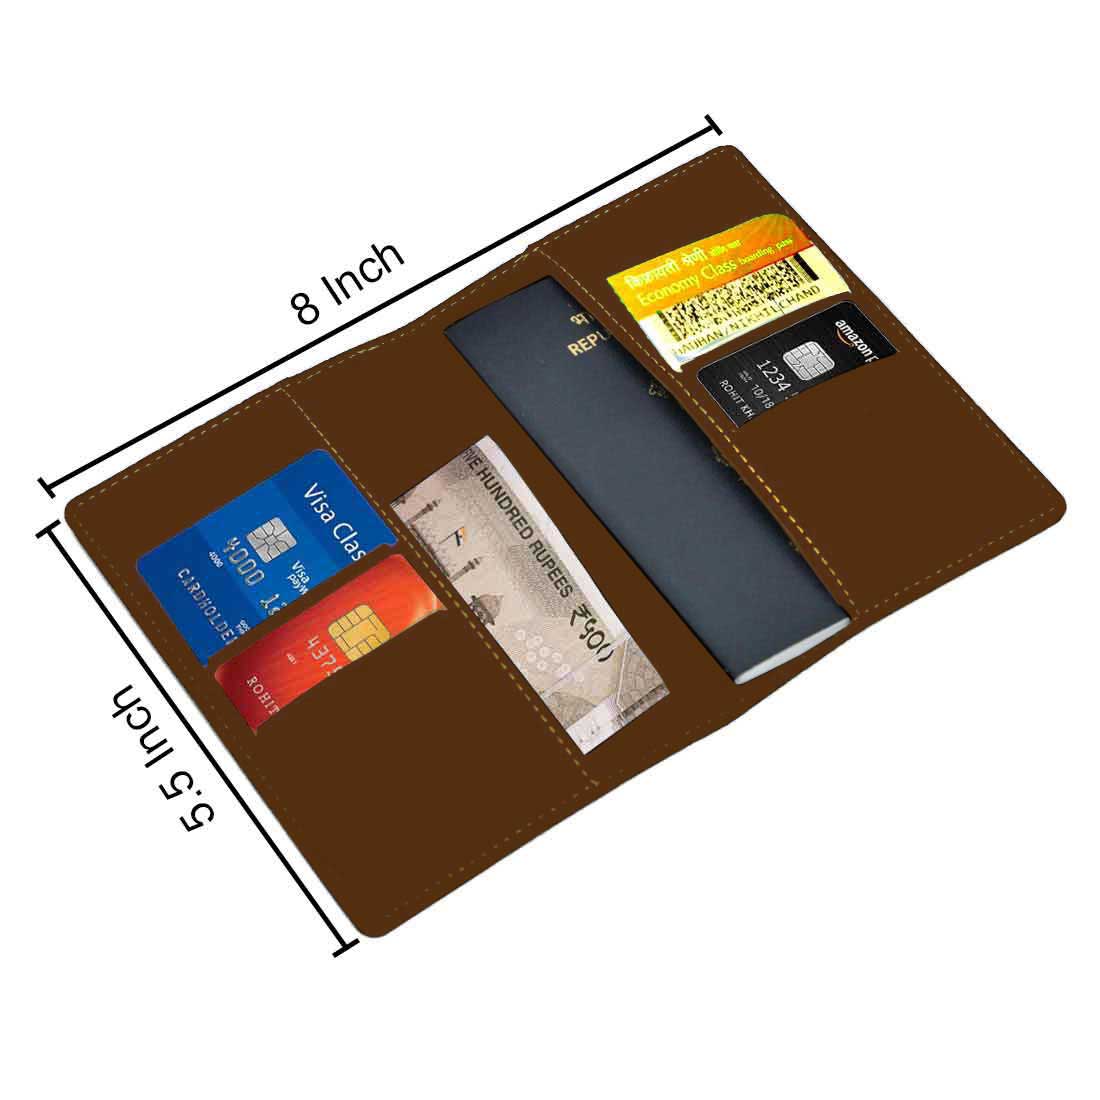 Cool Passport Covers Faux Leather Custom Holders for Passports